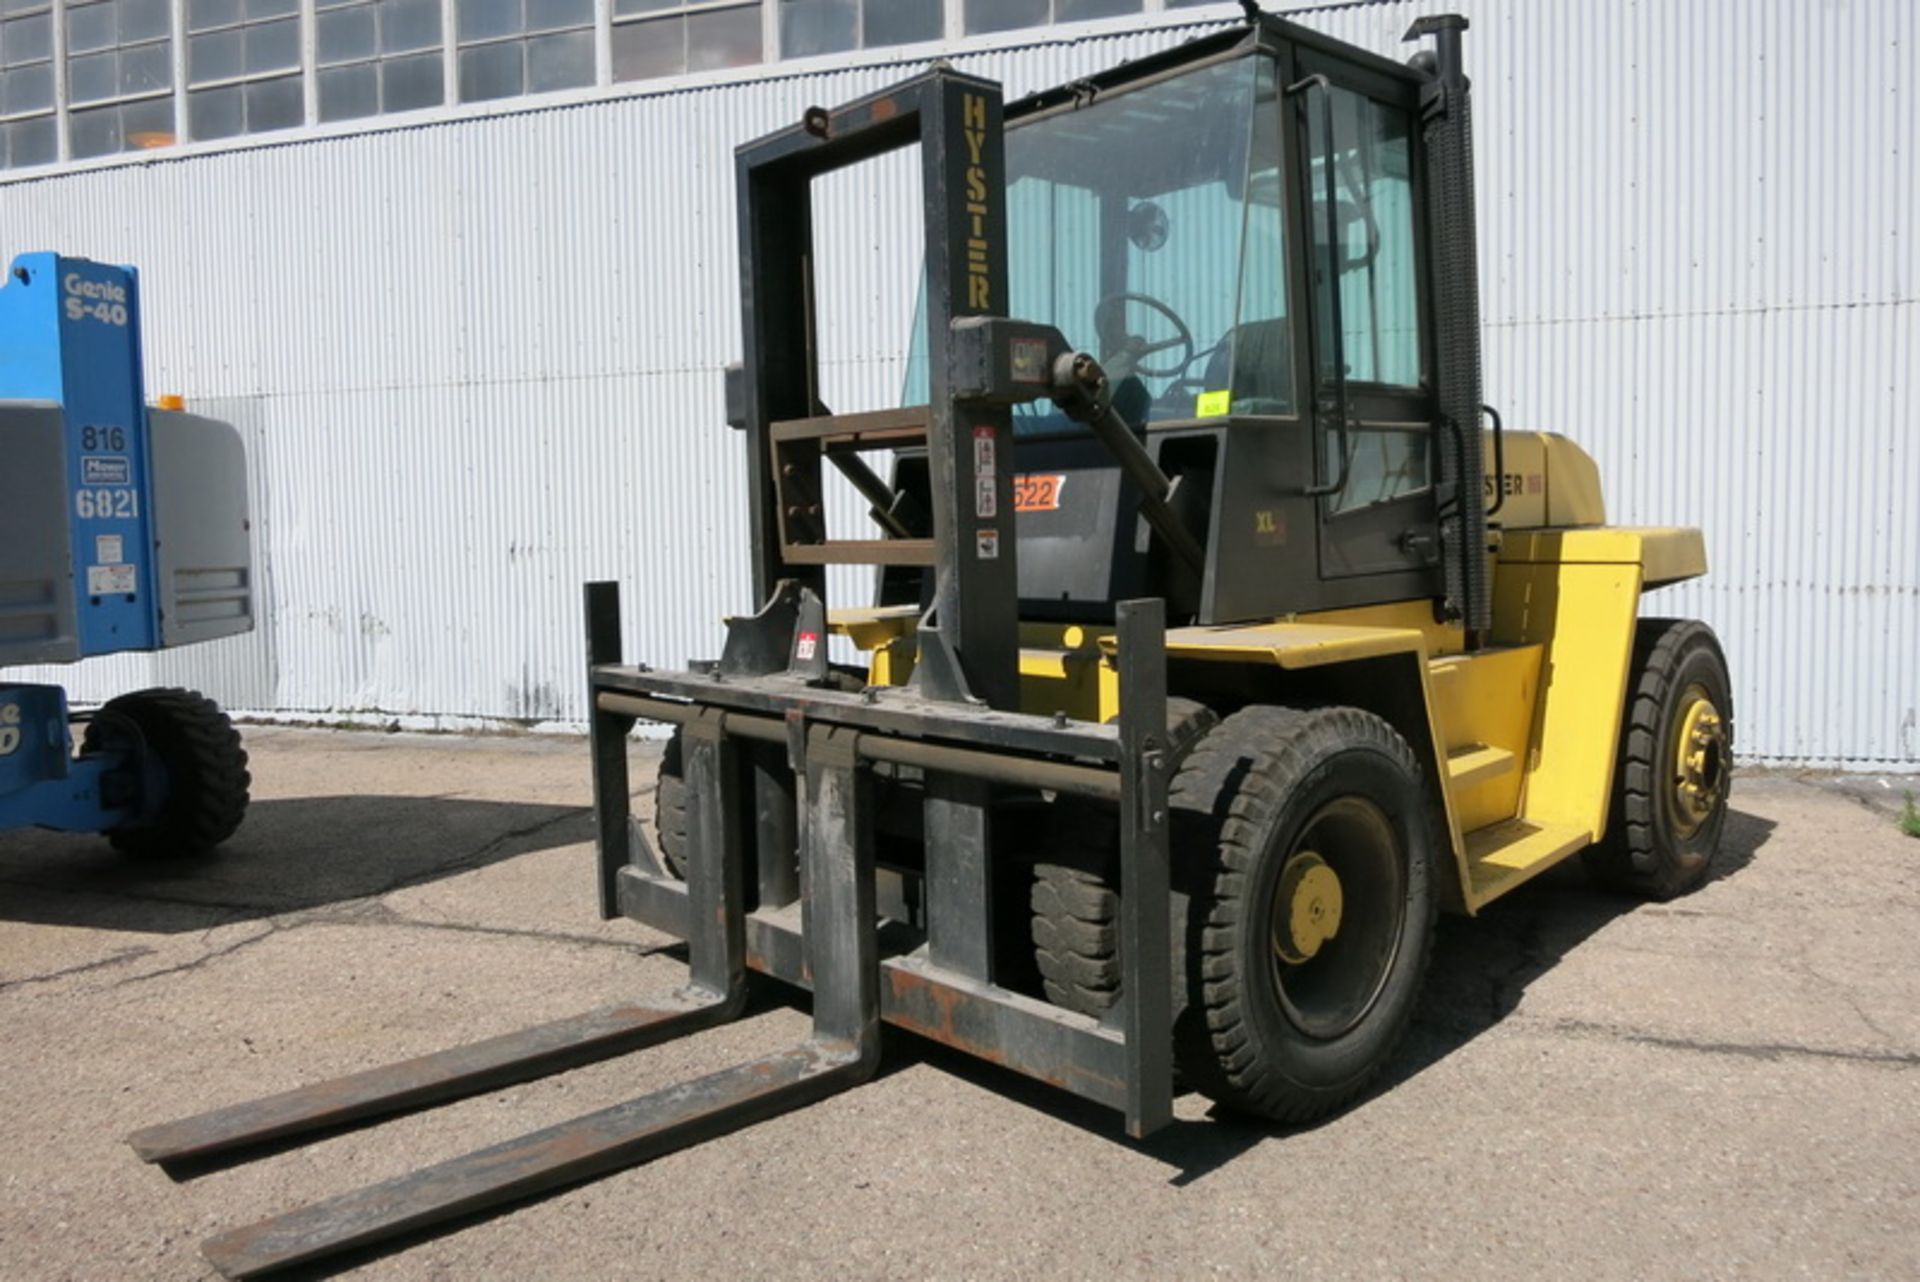 Hyster forklift, model 165X, s/n E007D04415X, single stage mast, 100" lift, solid tire, diesel (43